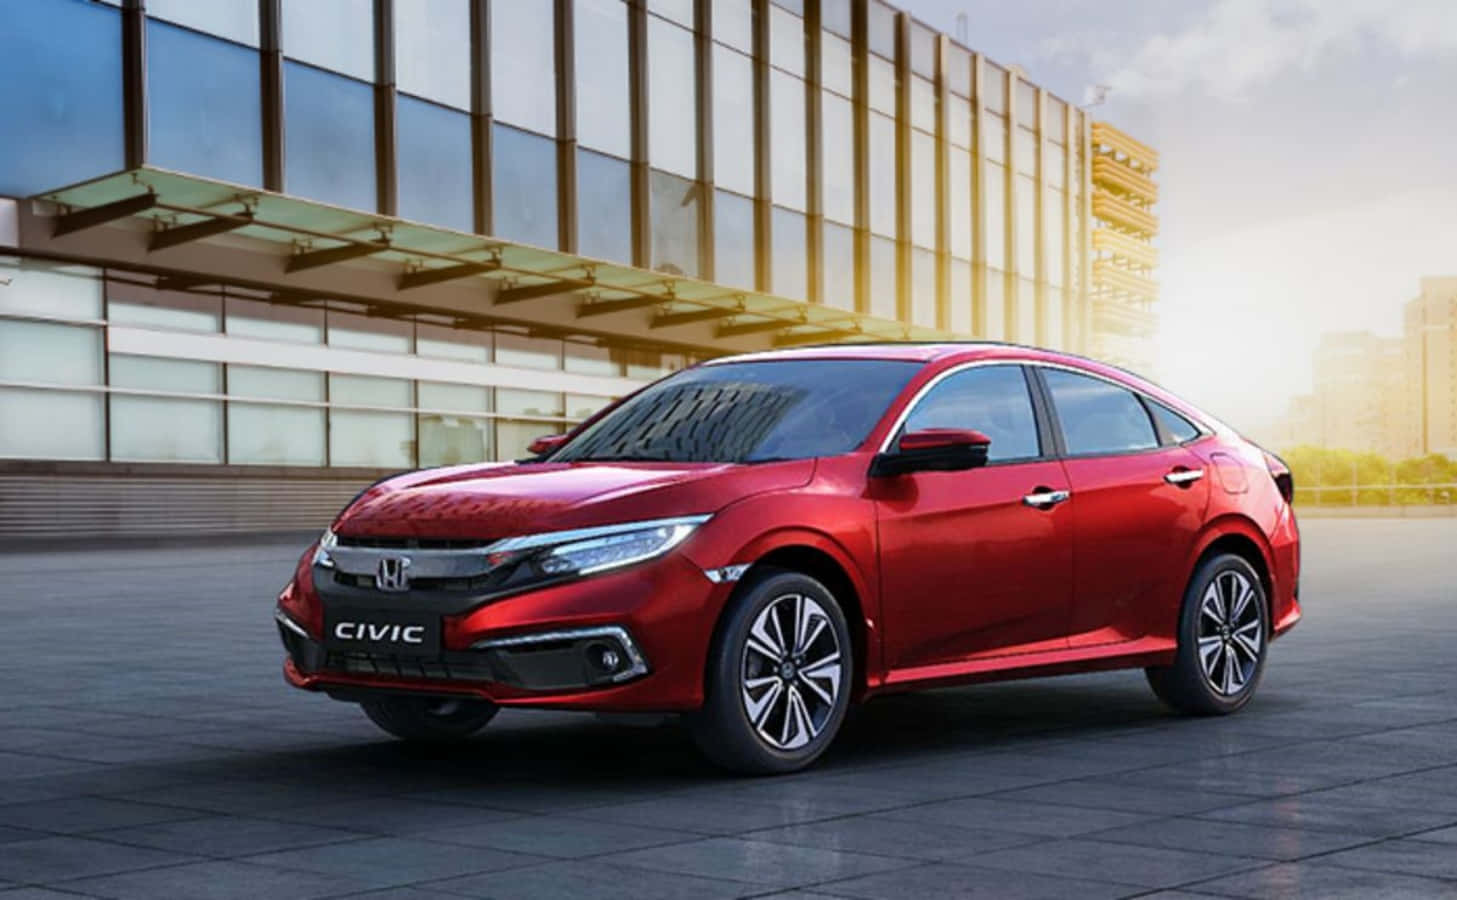 The Red 2019 Honda Civic Sedan Is Parked In Front Of A Building